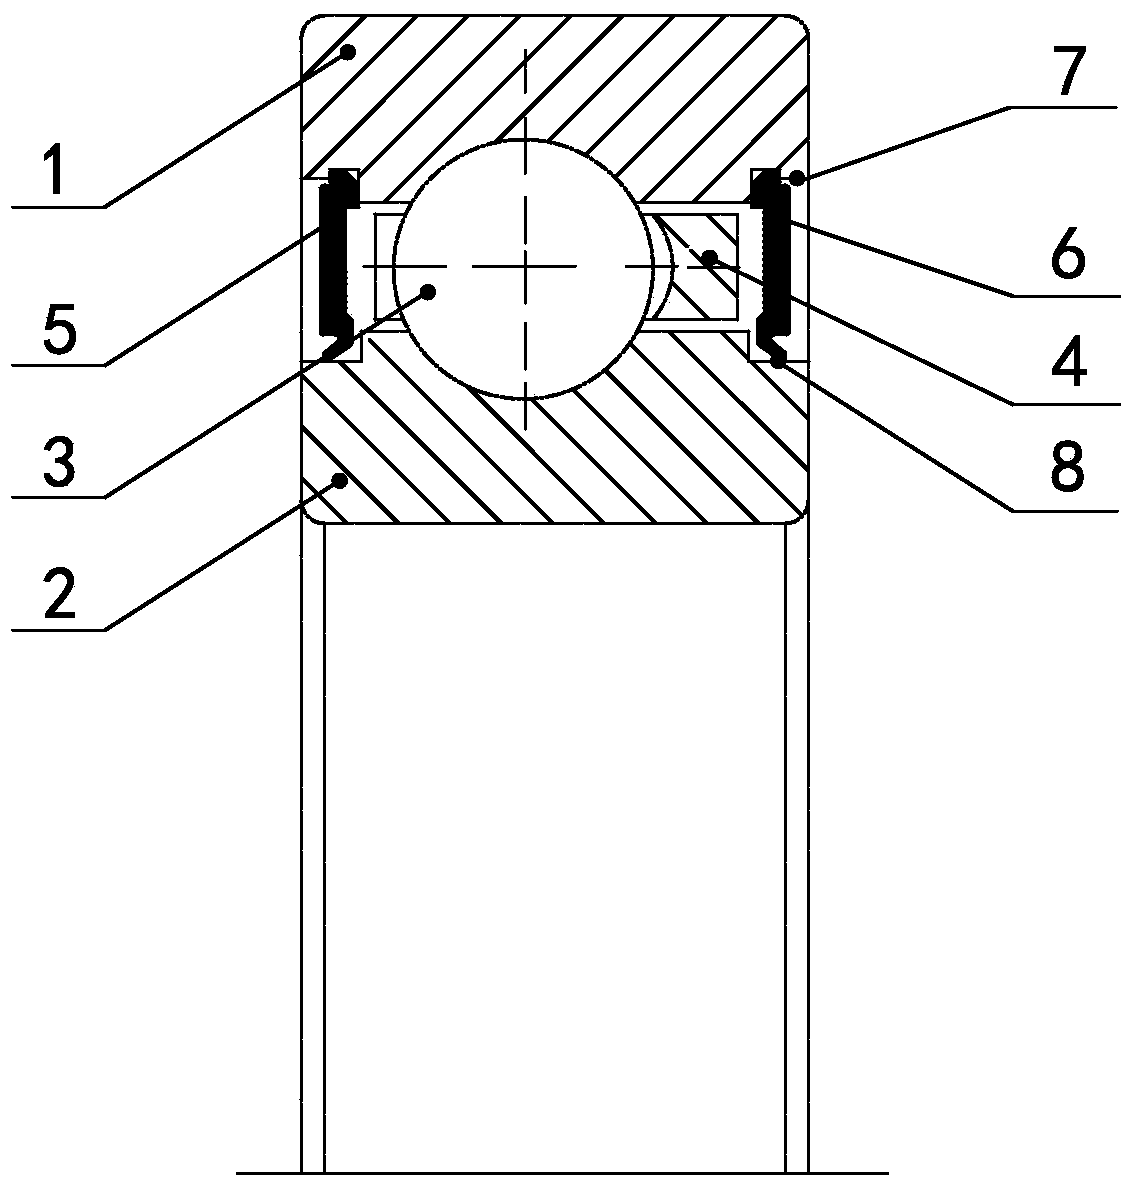 Sealing ring framework structure of ultra-thin-wall bearing with uniform section